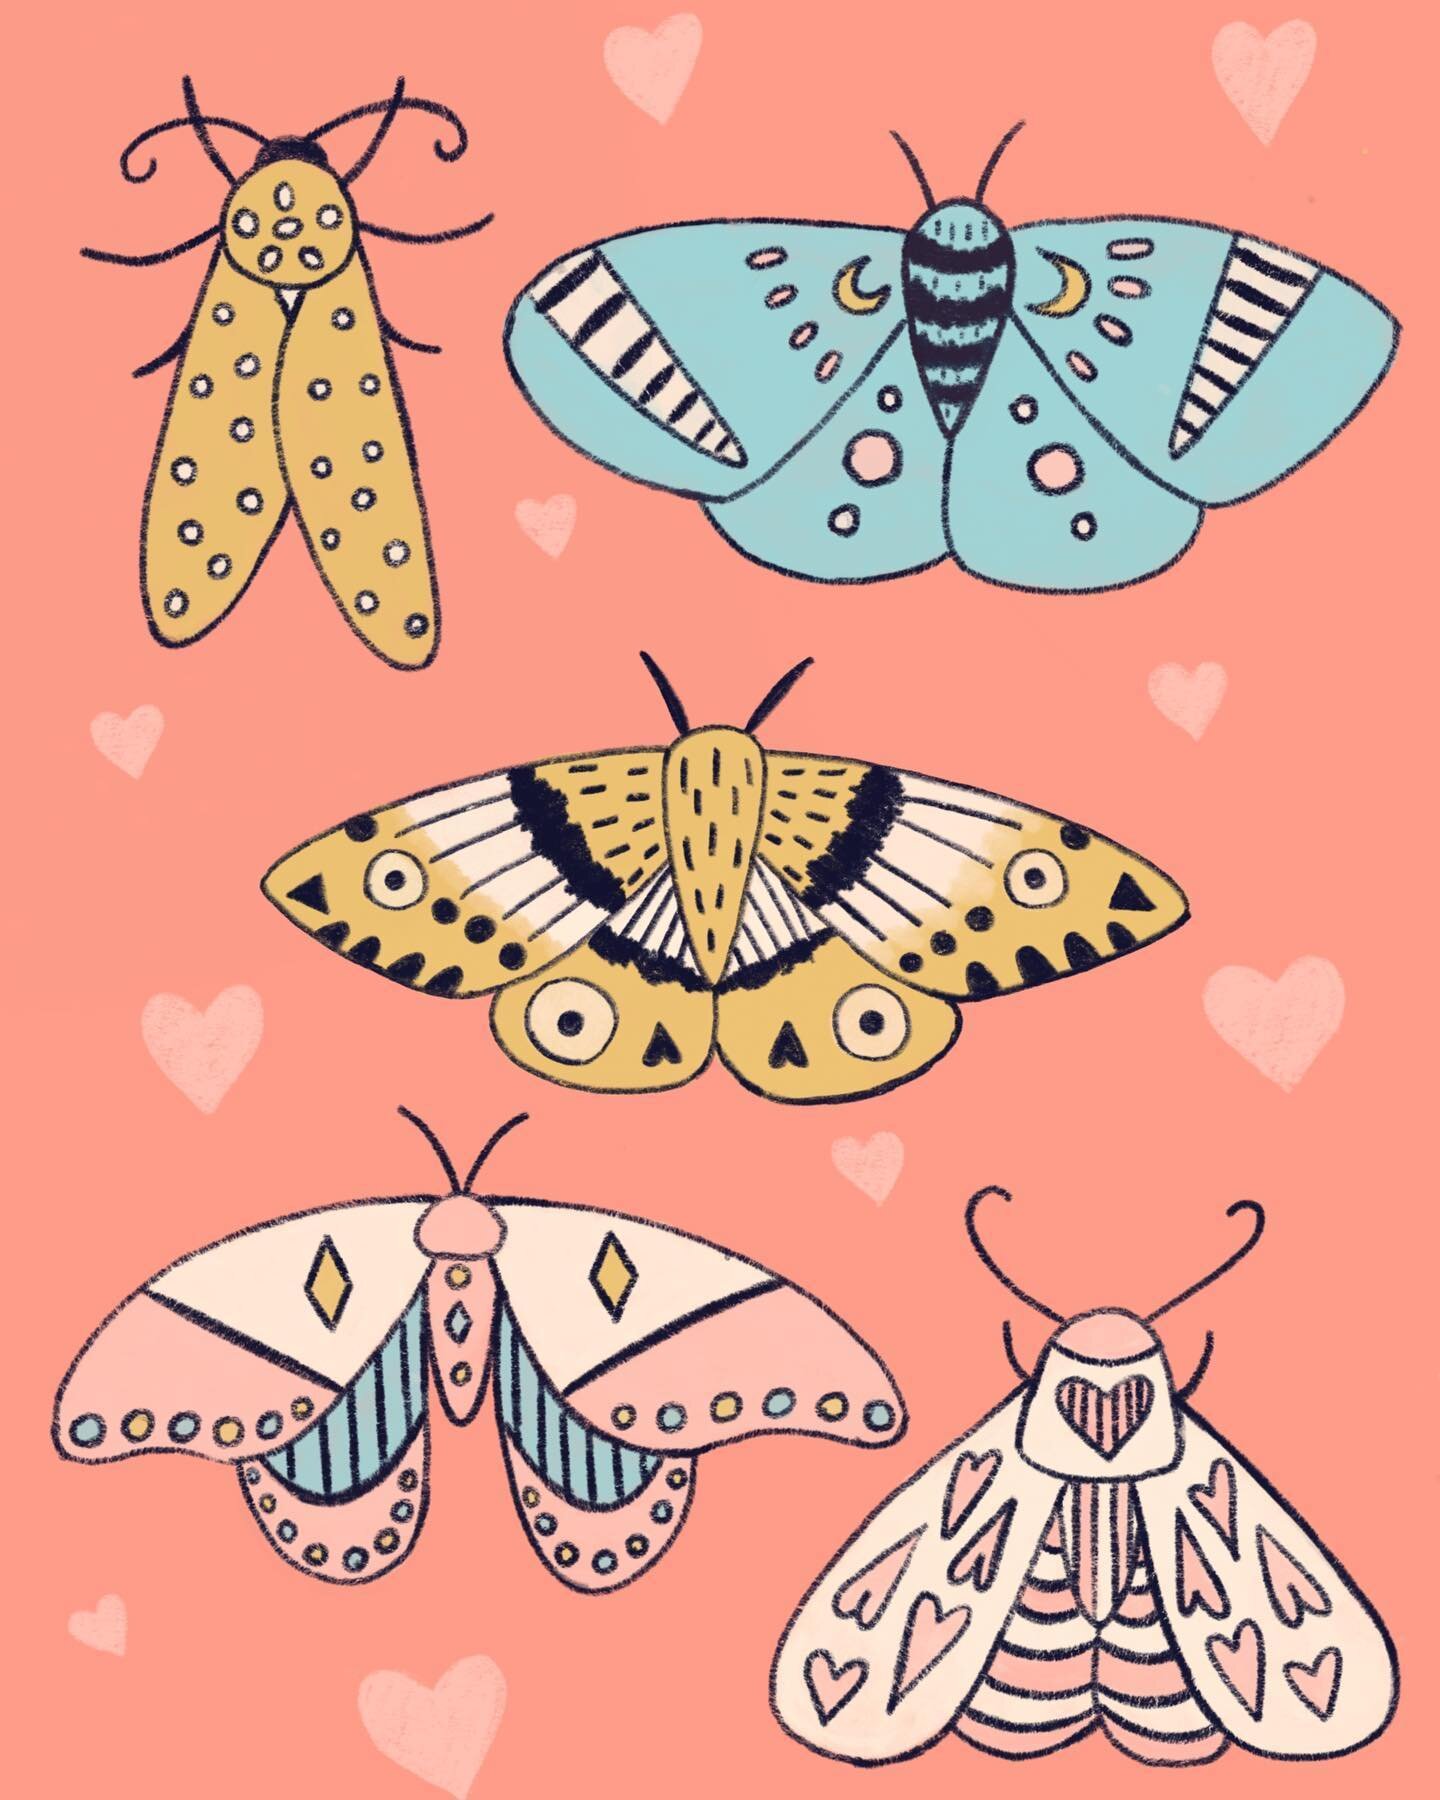 Completed moth sheet! Already up on Redbubble
.
.
.
.
.
.
#art #artist #artistsoninstagram #illustration #illustrationartists #illustrator #illustrationoninstagram #procreate #digitalart #moth #butterfly #insects #pastel #brightcolors #pastelcolors #